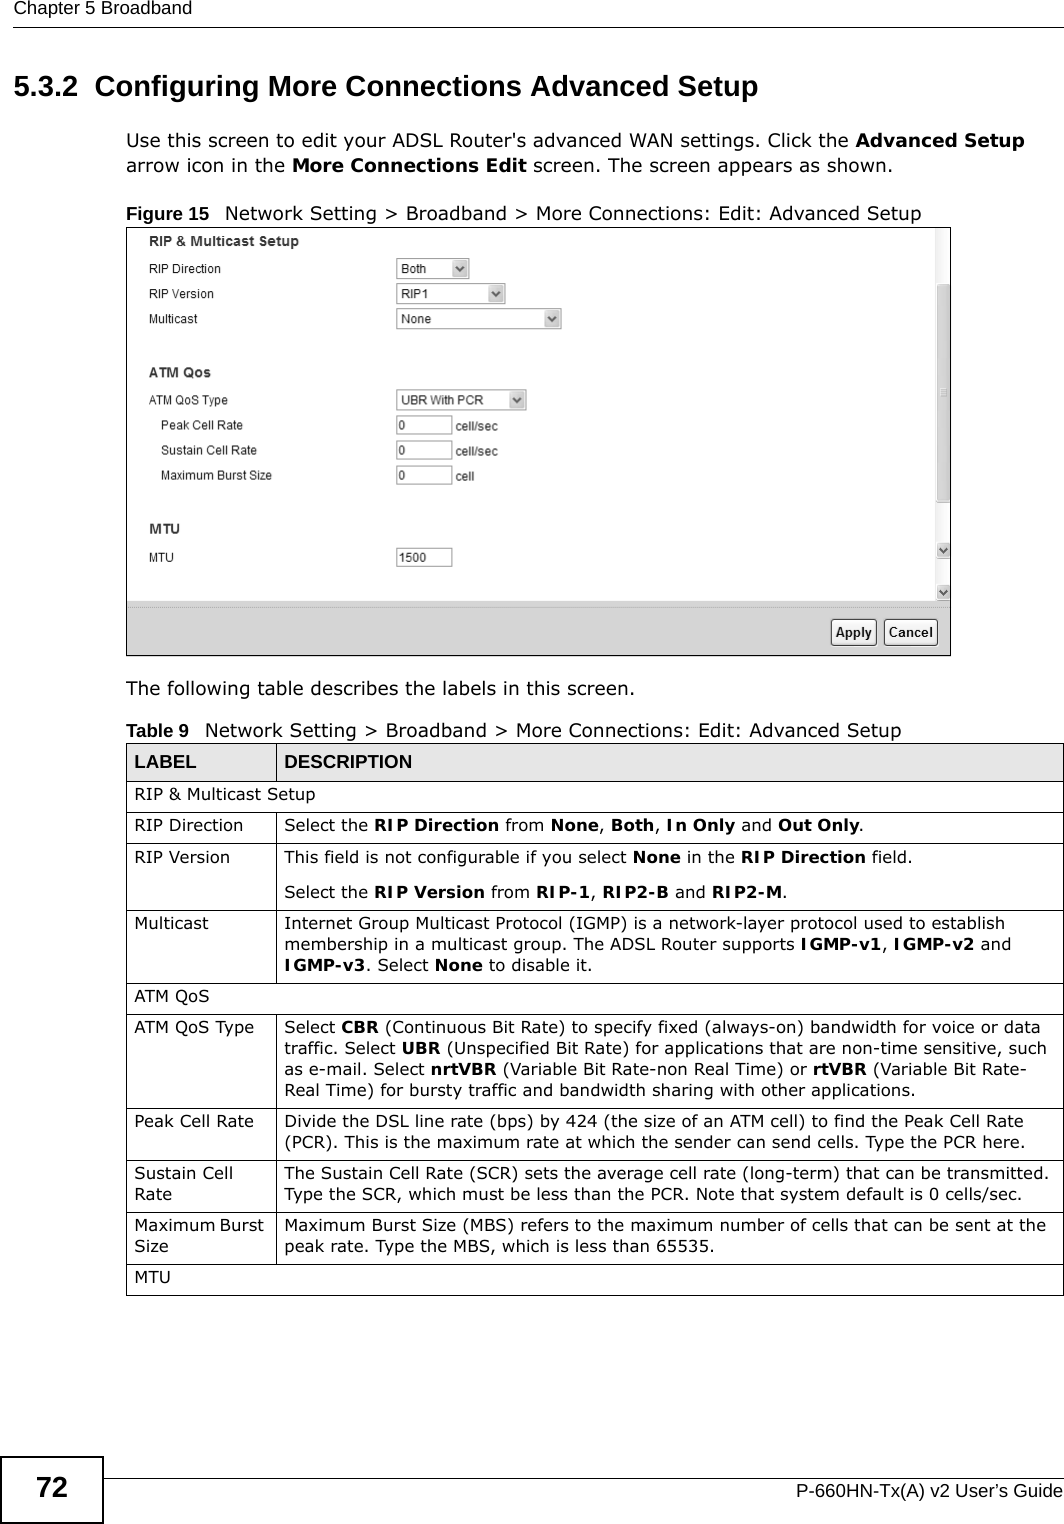 Chapter 5 BroadbandP-660HN-Tx(A) v2 User’s Guide725.3.2  Configuring More Connections Advanced Setup Use this screen to edit your ADSL Router&apos;s advanced WAN settings. Click the Advanced Setup arrow icon in the More Connections Edit screen. The screen appears as shown.Figure 15   Network Setting &gt; Broadband &gt; More Connections: Edit: Advanced SetupThe following table describes the labels in this screen.  Table 9   Network Setting &gt; Broadband &gt; More Connections: Edit: Advanced SetupLABEL DESCRIPTIONRIP &amp; Multicast SetupRIP Direction Select the RIP Direction from None, Both, In Only and Out Only.RIP Version This field is not configurable if you select None in the RIP Direction field.Select the RIP Version from RIP-1, RIP2-B and RIP2-M. Multicast Internet Group Multicast Protocol (IGMP) is a network-layer protocol used to establish membership in a multicast group. The ADSL Router supports IGMP-v1, IGMP-v2 and IGMP-v3. Select None to disable it.ATM QoSATM QoS Type Select CBR (Continuous Bit Rate) to specify fixed (always-on) bandwidth for voice or data traffic. Select UBR (Unspecified Bit Rate) for applications that are non-time sensitive, such as e-mail. Select nrtVBR (Variable Bit Rate-non Real Time) or rtVBR (Variable Bit Rate-Real Time) for bursty traffic and bandwidth sharing with other applications. Peak Cell Rate Divide the DSL line rate (bps) by 424 (the size of an ATM cell) to find the Peak Cell Rate (PCR). This is the maximum rate at which the sender can send cells. Type the PCR here.Sustain Cell RateThe Sustain Cell Rate (SCR) sets the average cell rate (long-term) that can be transmitted. Type the SCR, which must be less than the PCR. Note that system default is 0 cells/sec. Maximum Burst SizeMaximum Burst Size (MBS) refers to the maximum number of cells that can be sent at the peak rate. Type the MBS, which is less than 65535. MTU